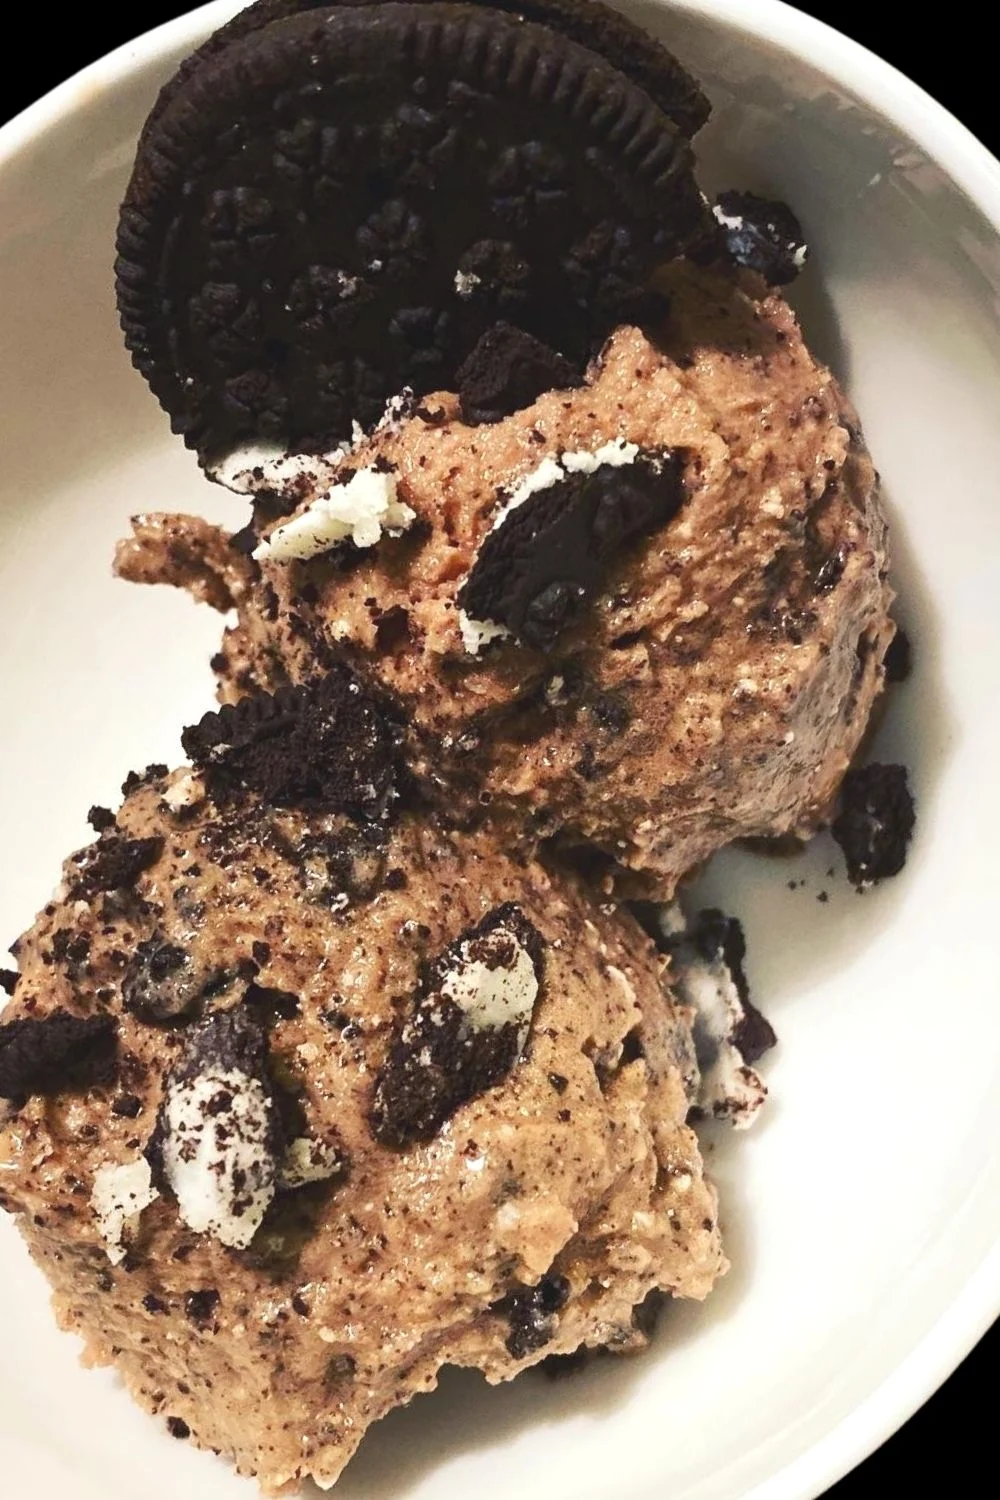 Two scoops of Oreo cookie ice cream in a bowl.